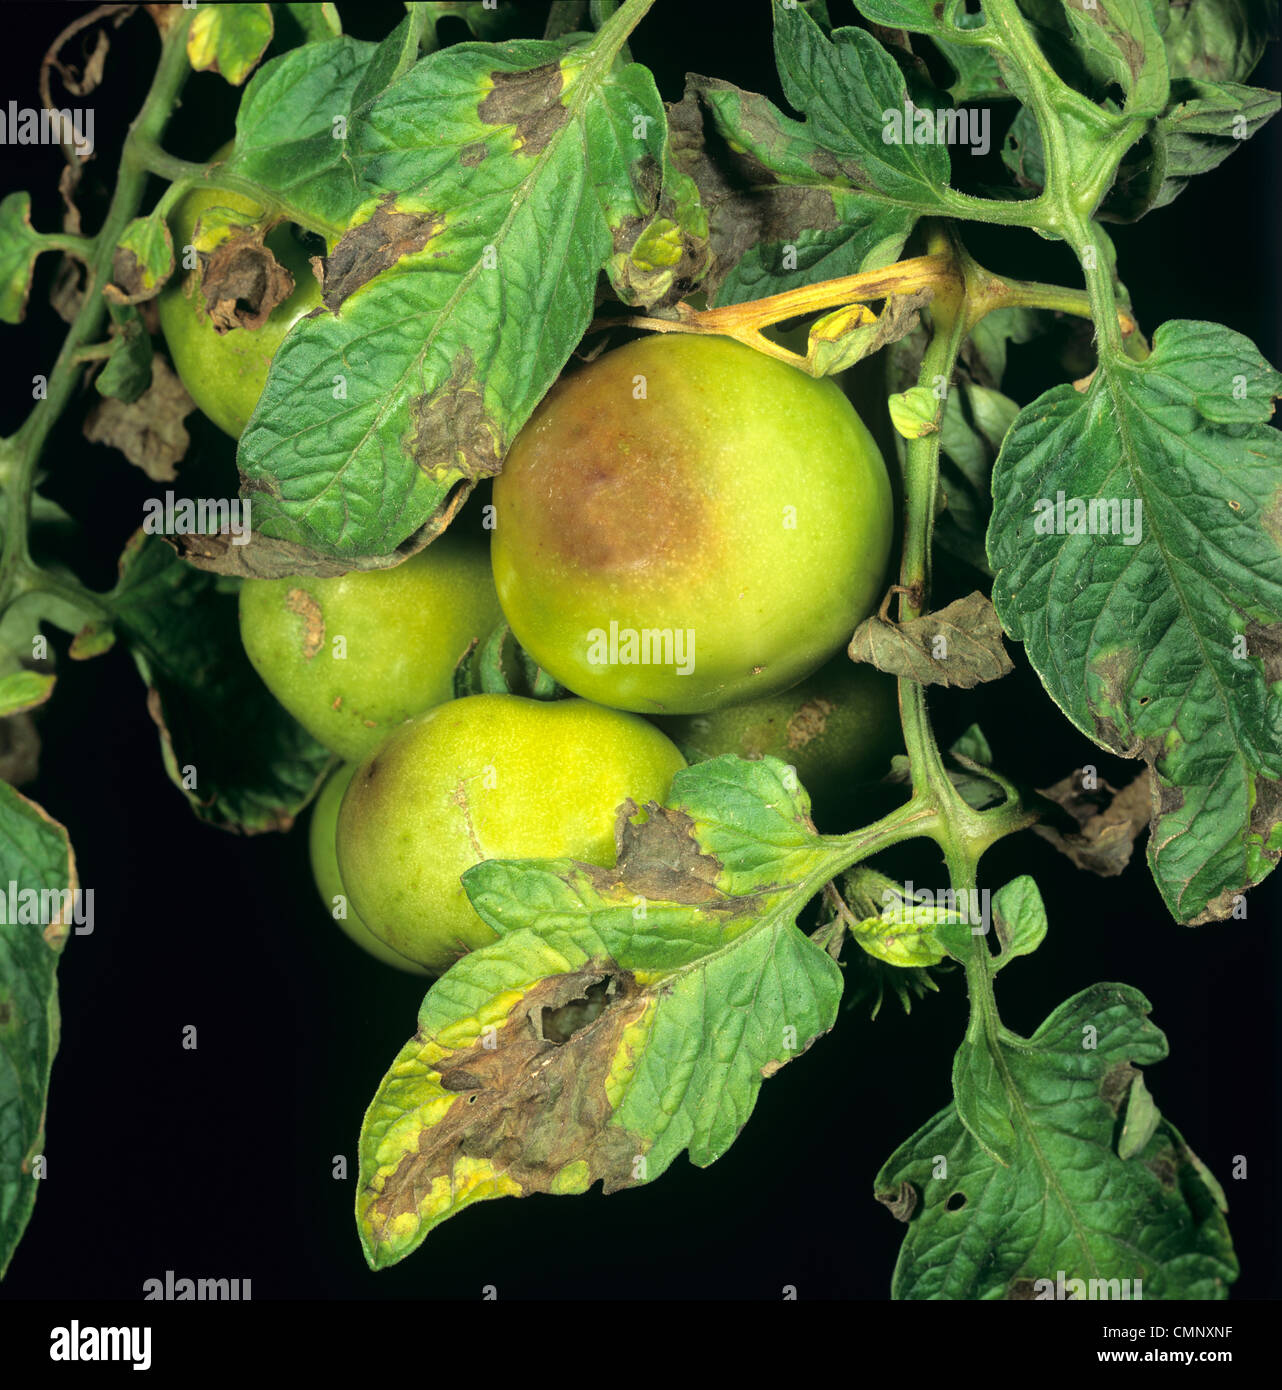 Late blight (Phytophthora infestans) damage to tomato leaves and fruit Stock Photo